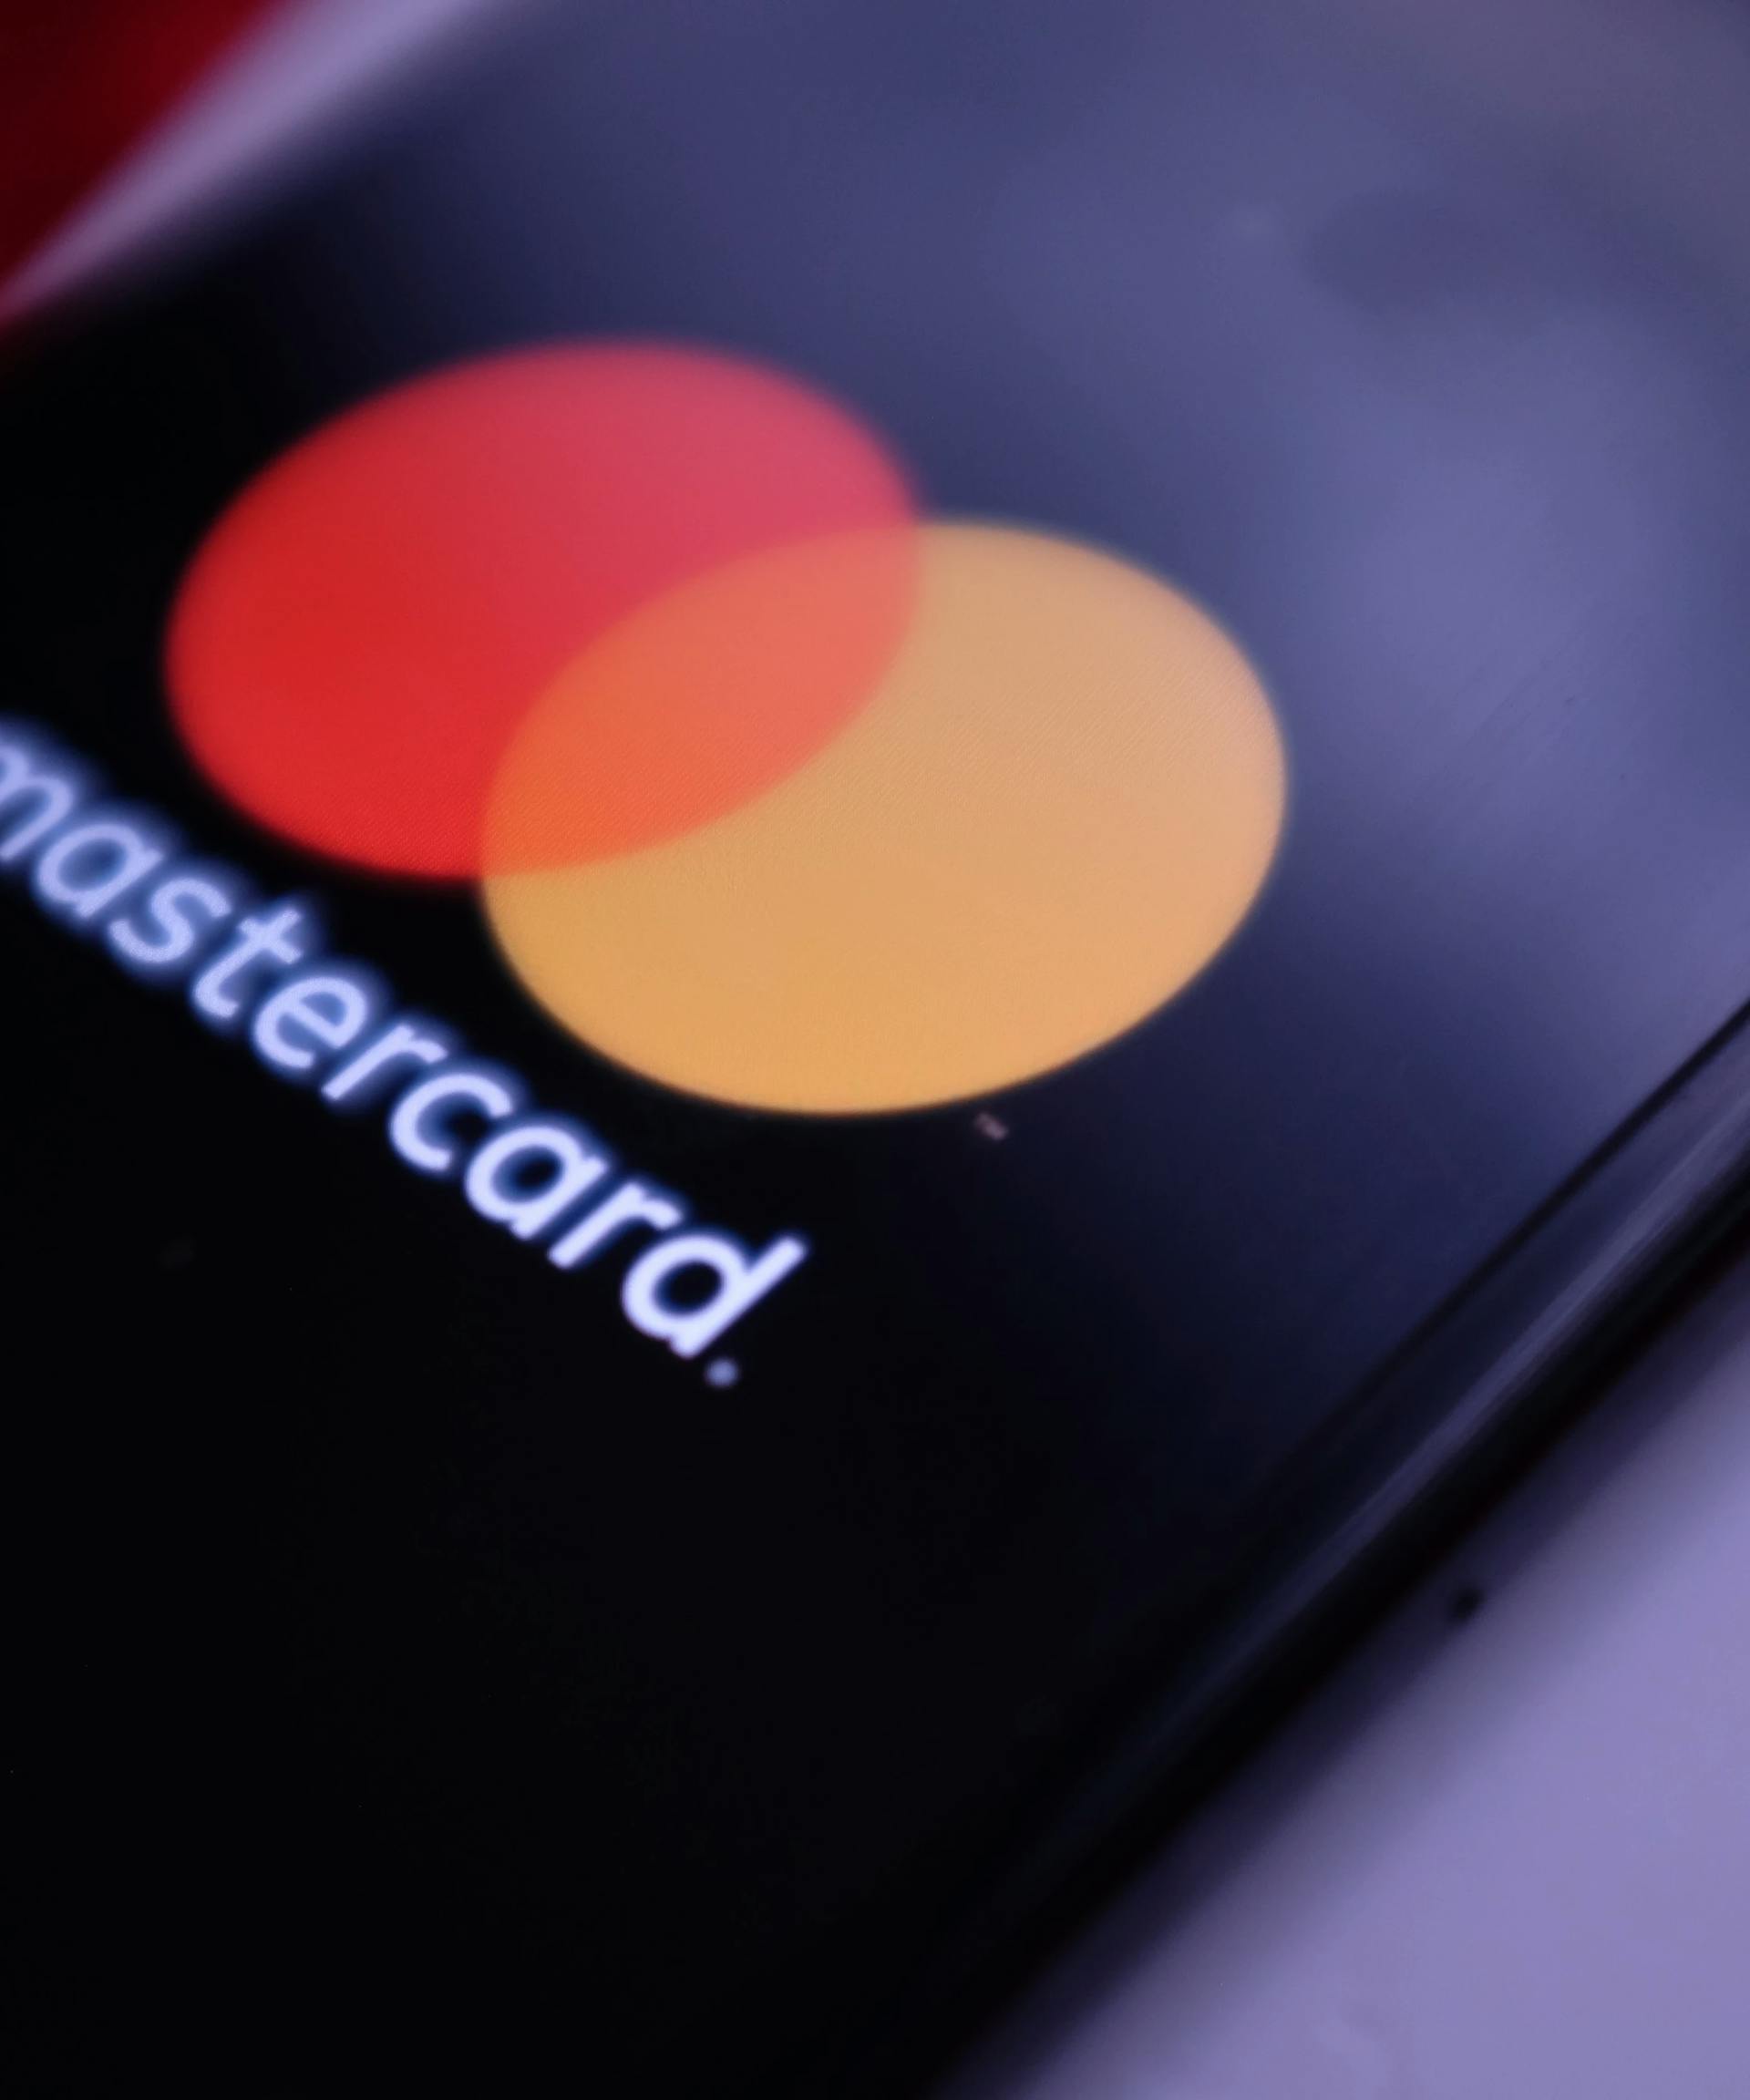 Mastercard Cutting Ties With Pornhub Isn’t The Victory We Think It Is